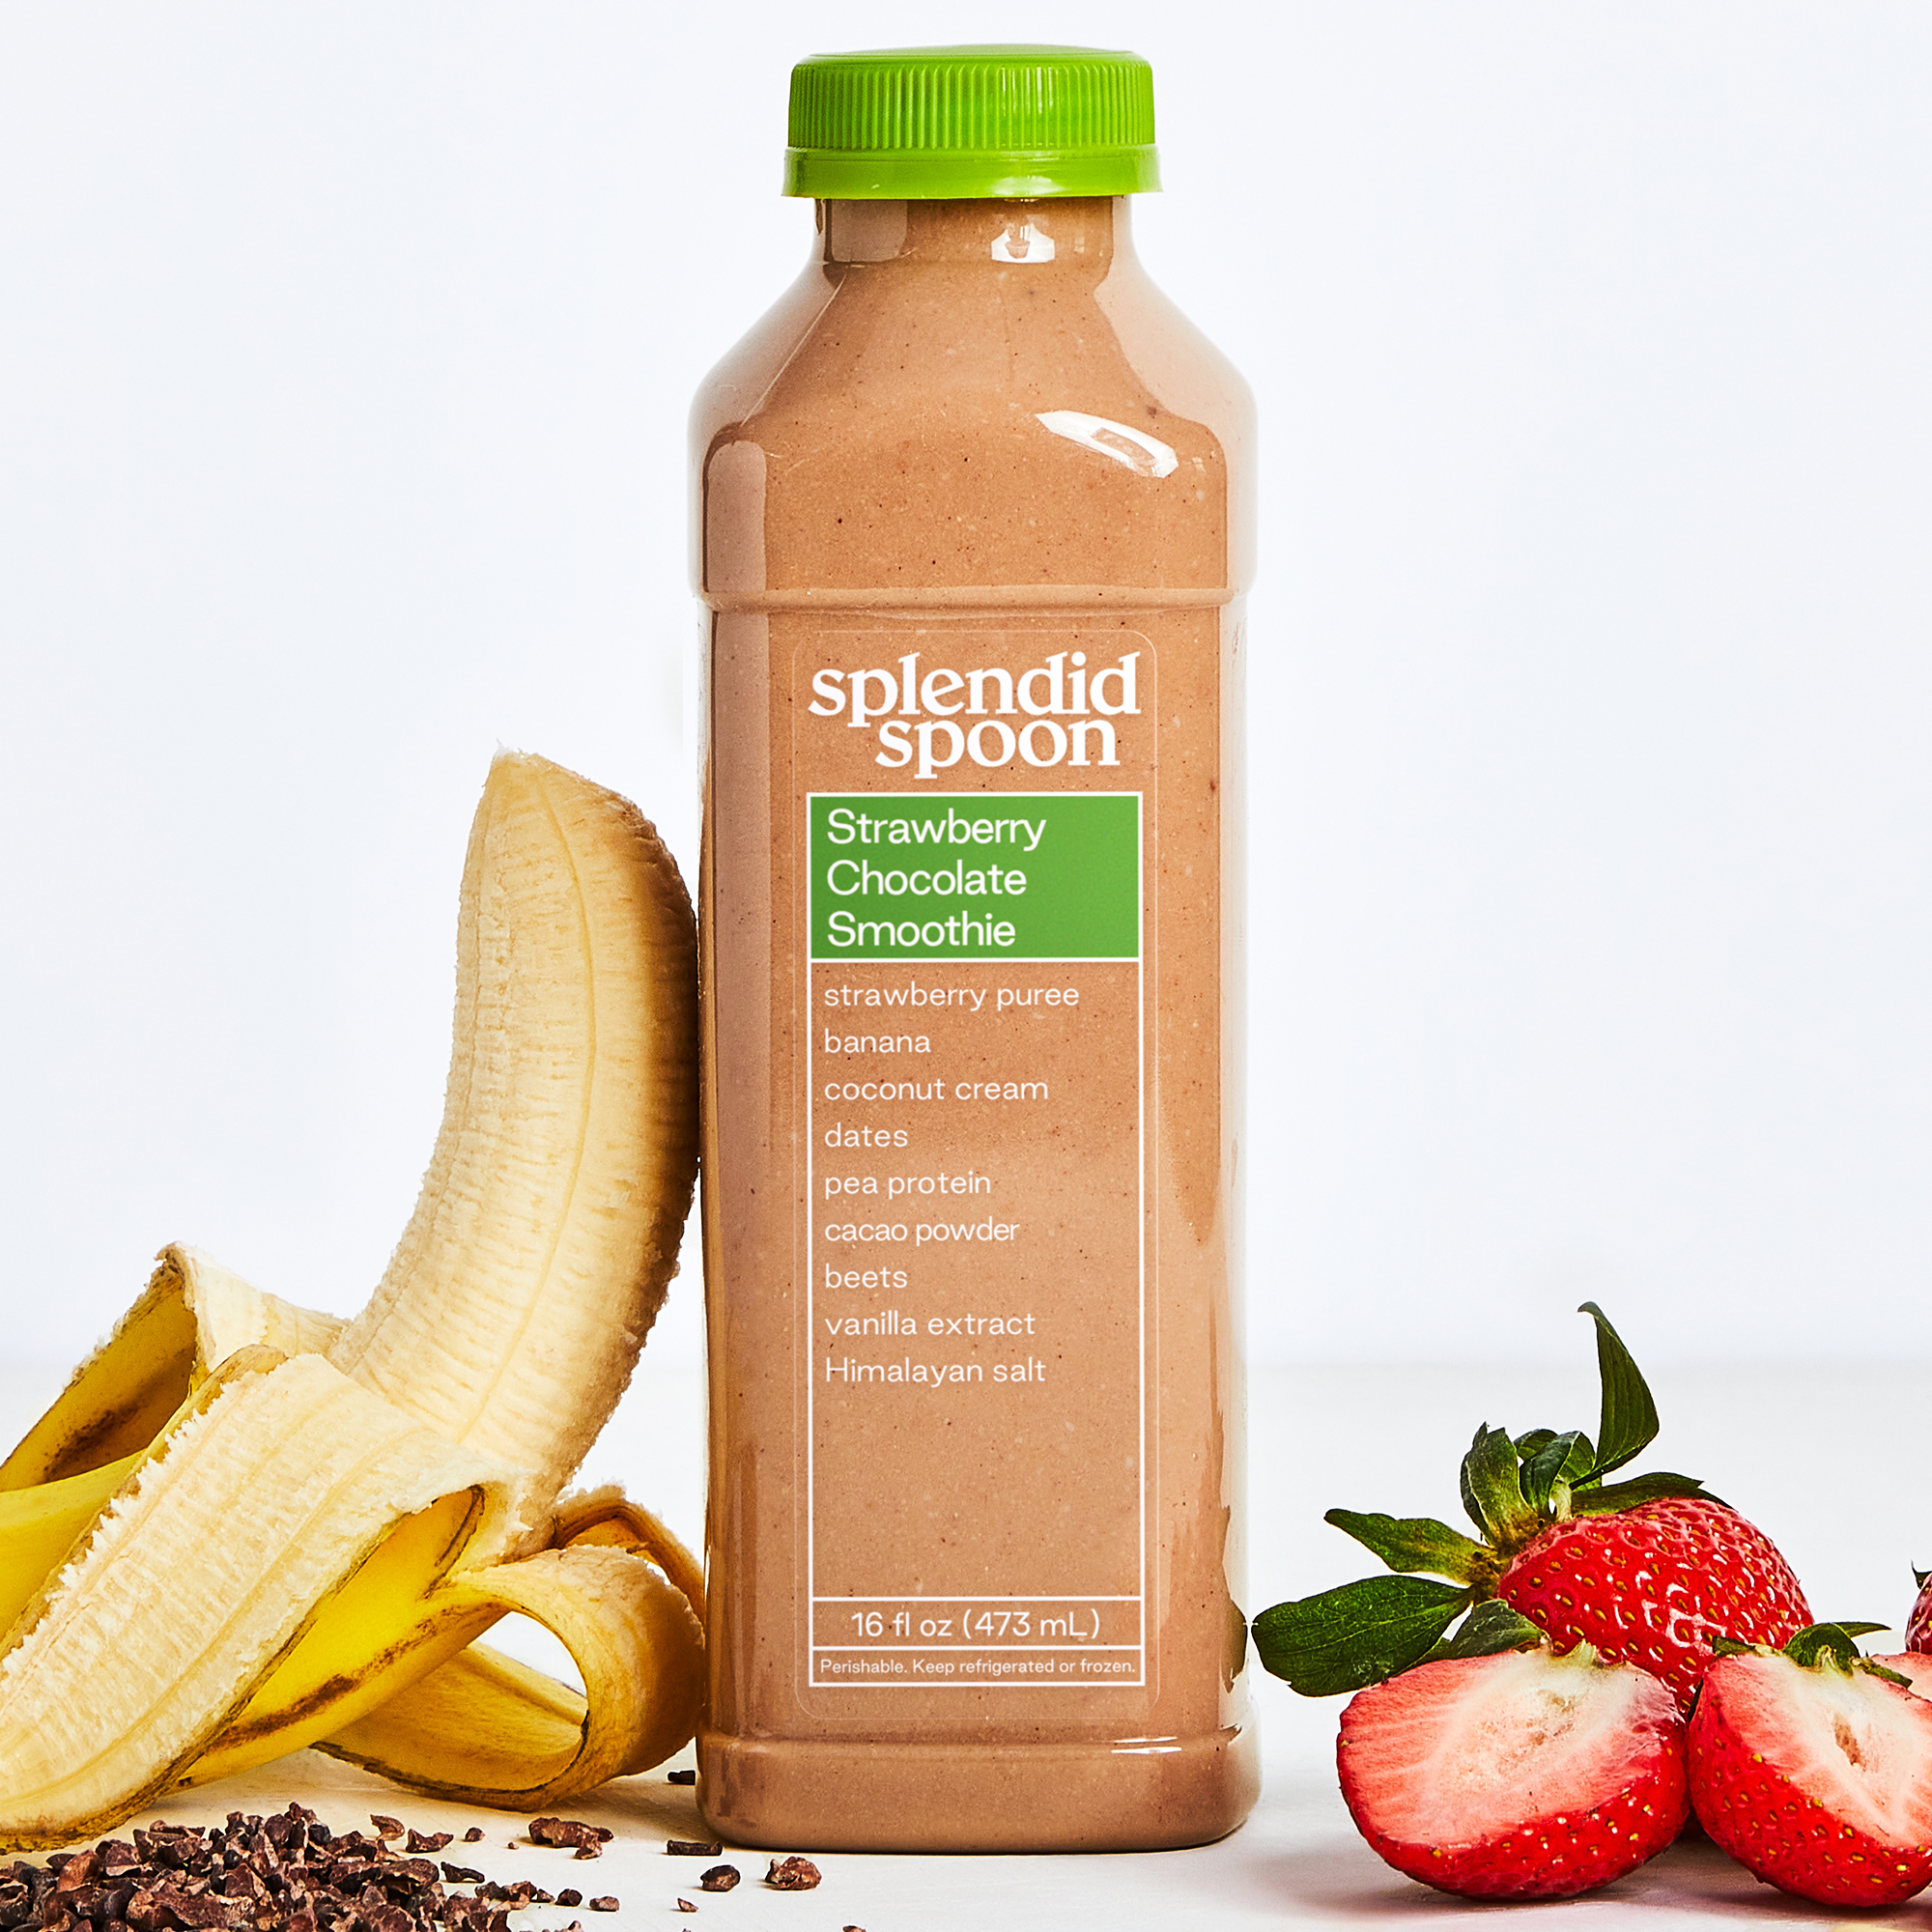 Strawberry Chocolate Smoothie with ingredients